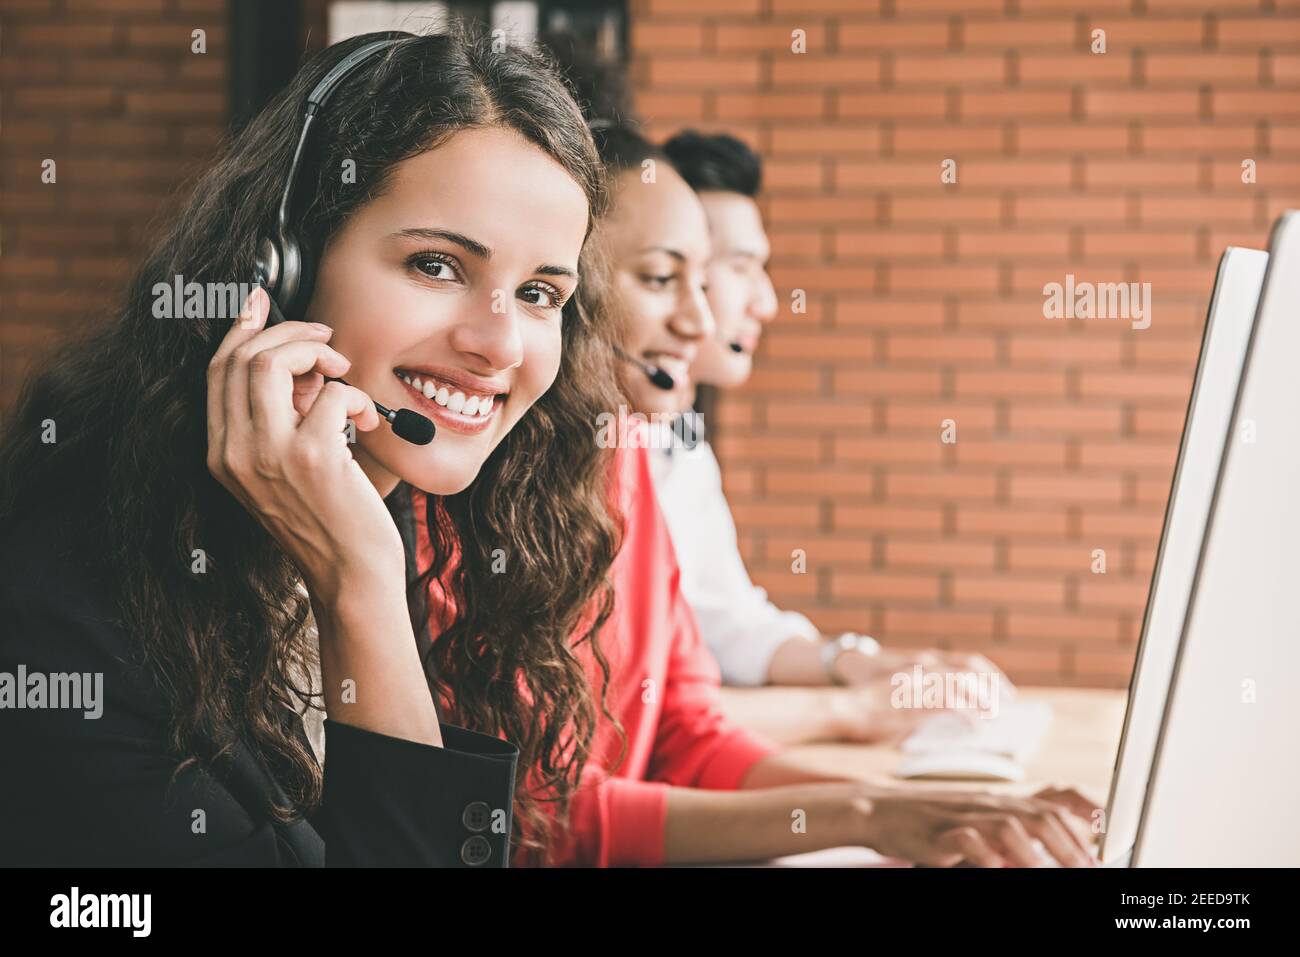 Smiling beautiful woman telemarketing customer service agent working in call center office with her multiethnic team Stock Photo